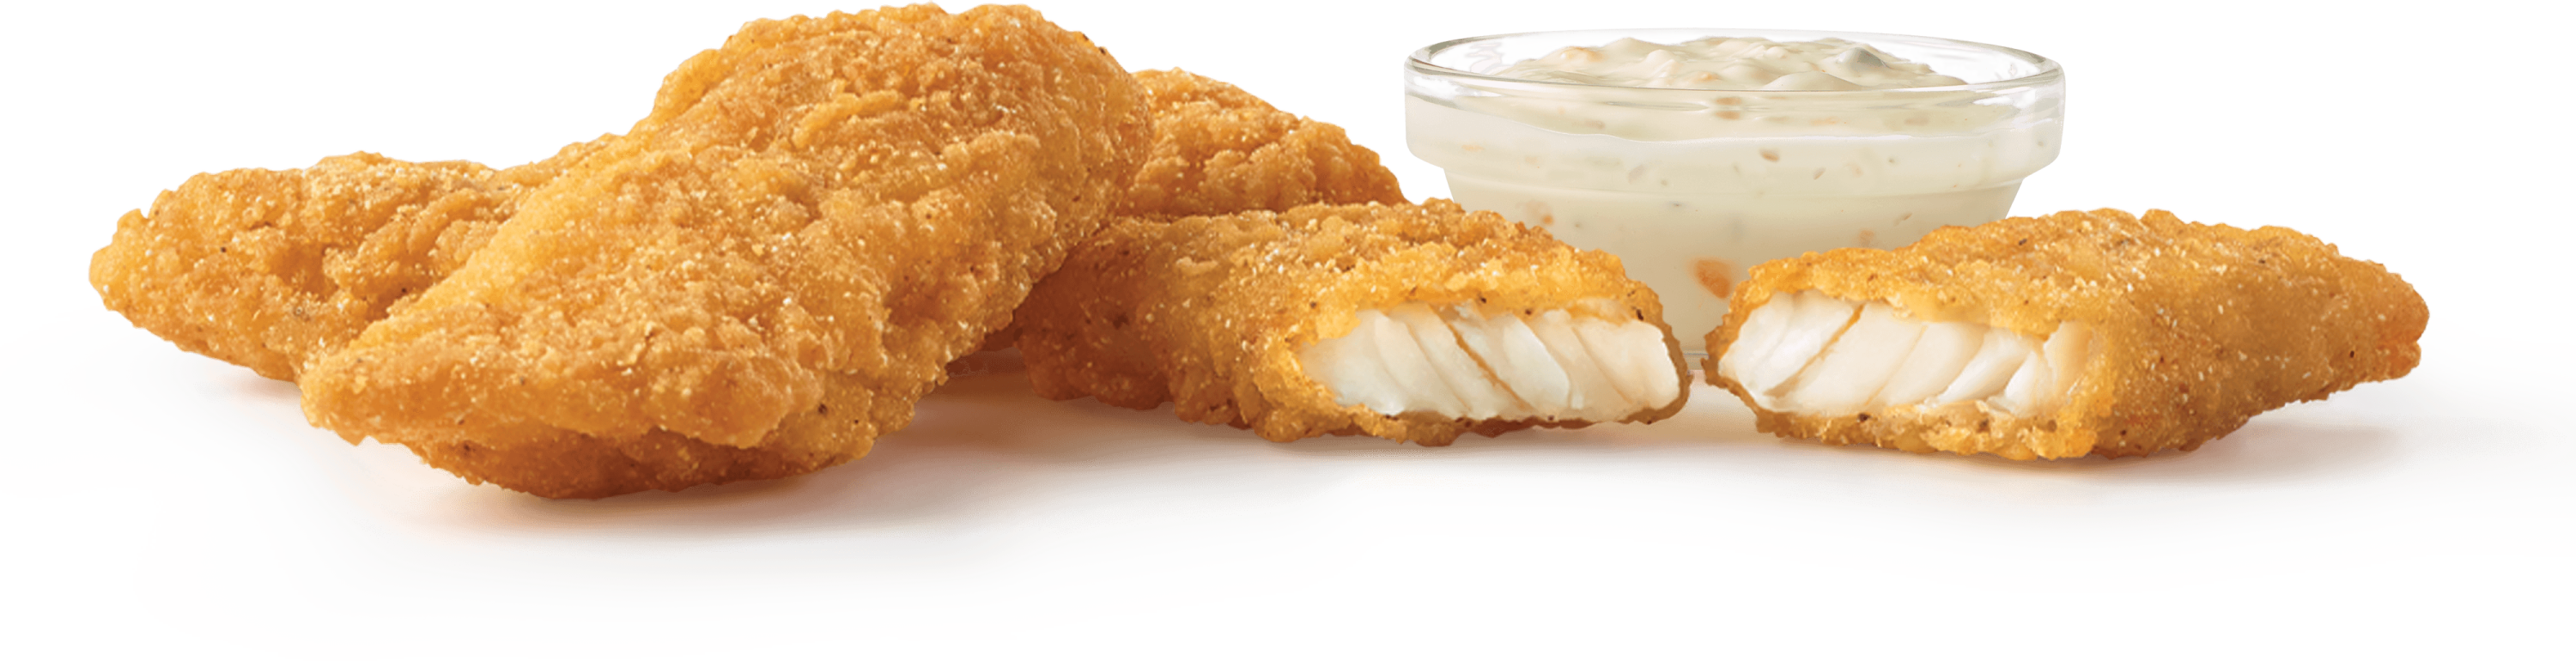 Arby's 3 Piece Hushpuppy Breaded Fish Strips Nutrition Facts